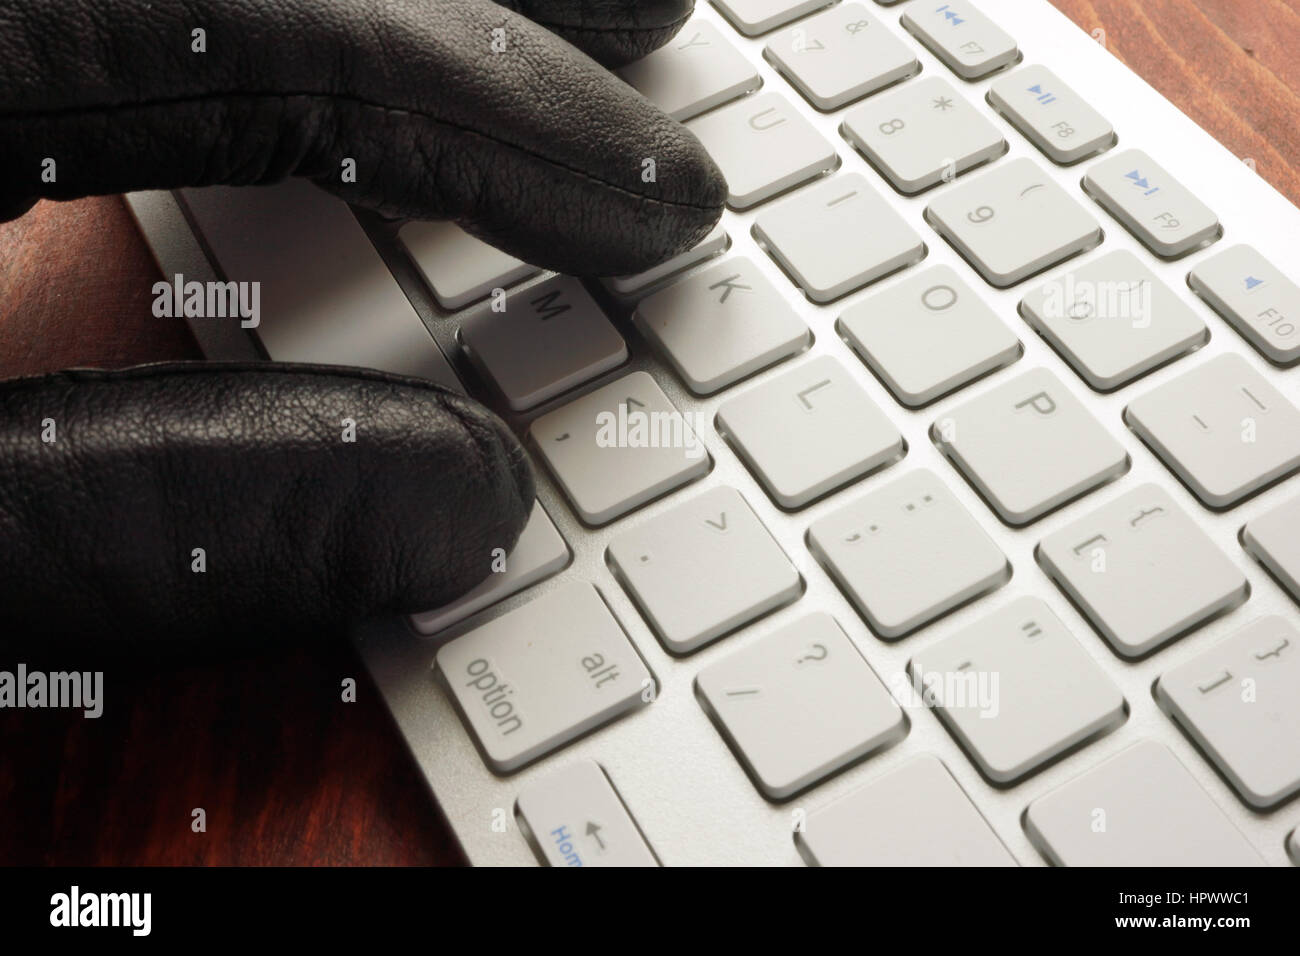 Hand in black glove types on keyboard. Stock Photo